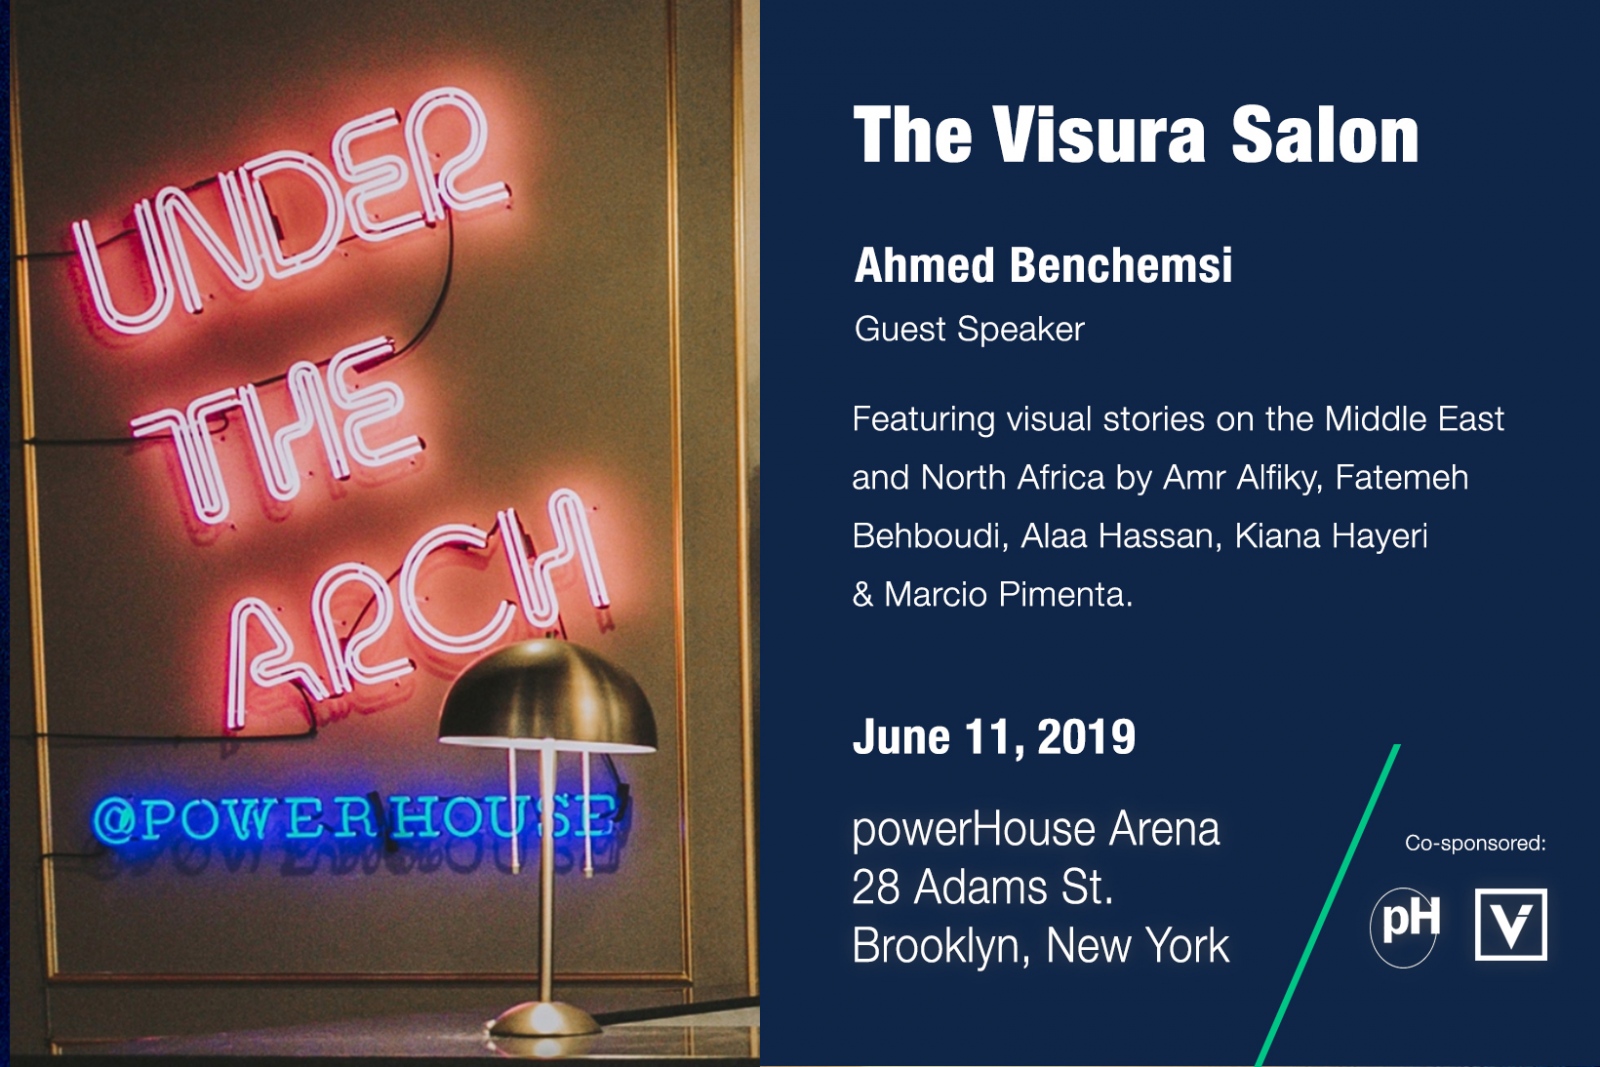 Join us tonight at the Visura Salon event starting at 7:00 PM at powerHouse Lounge in DUMBO, Brooklyn